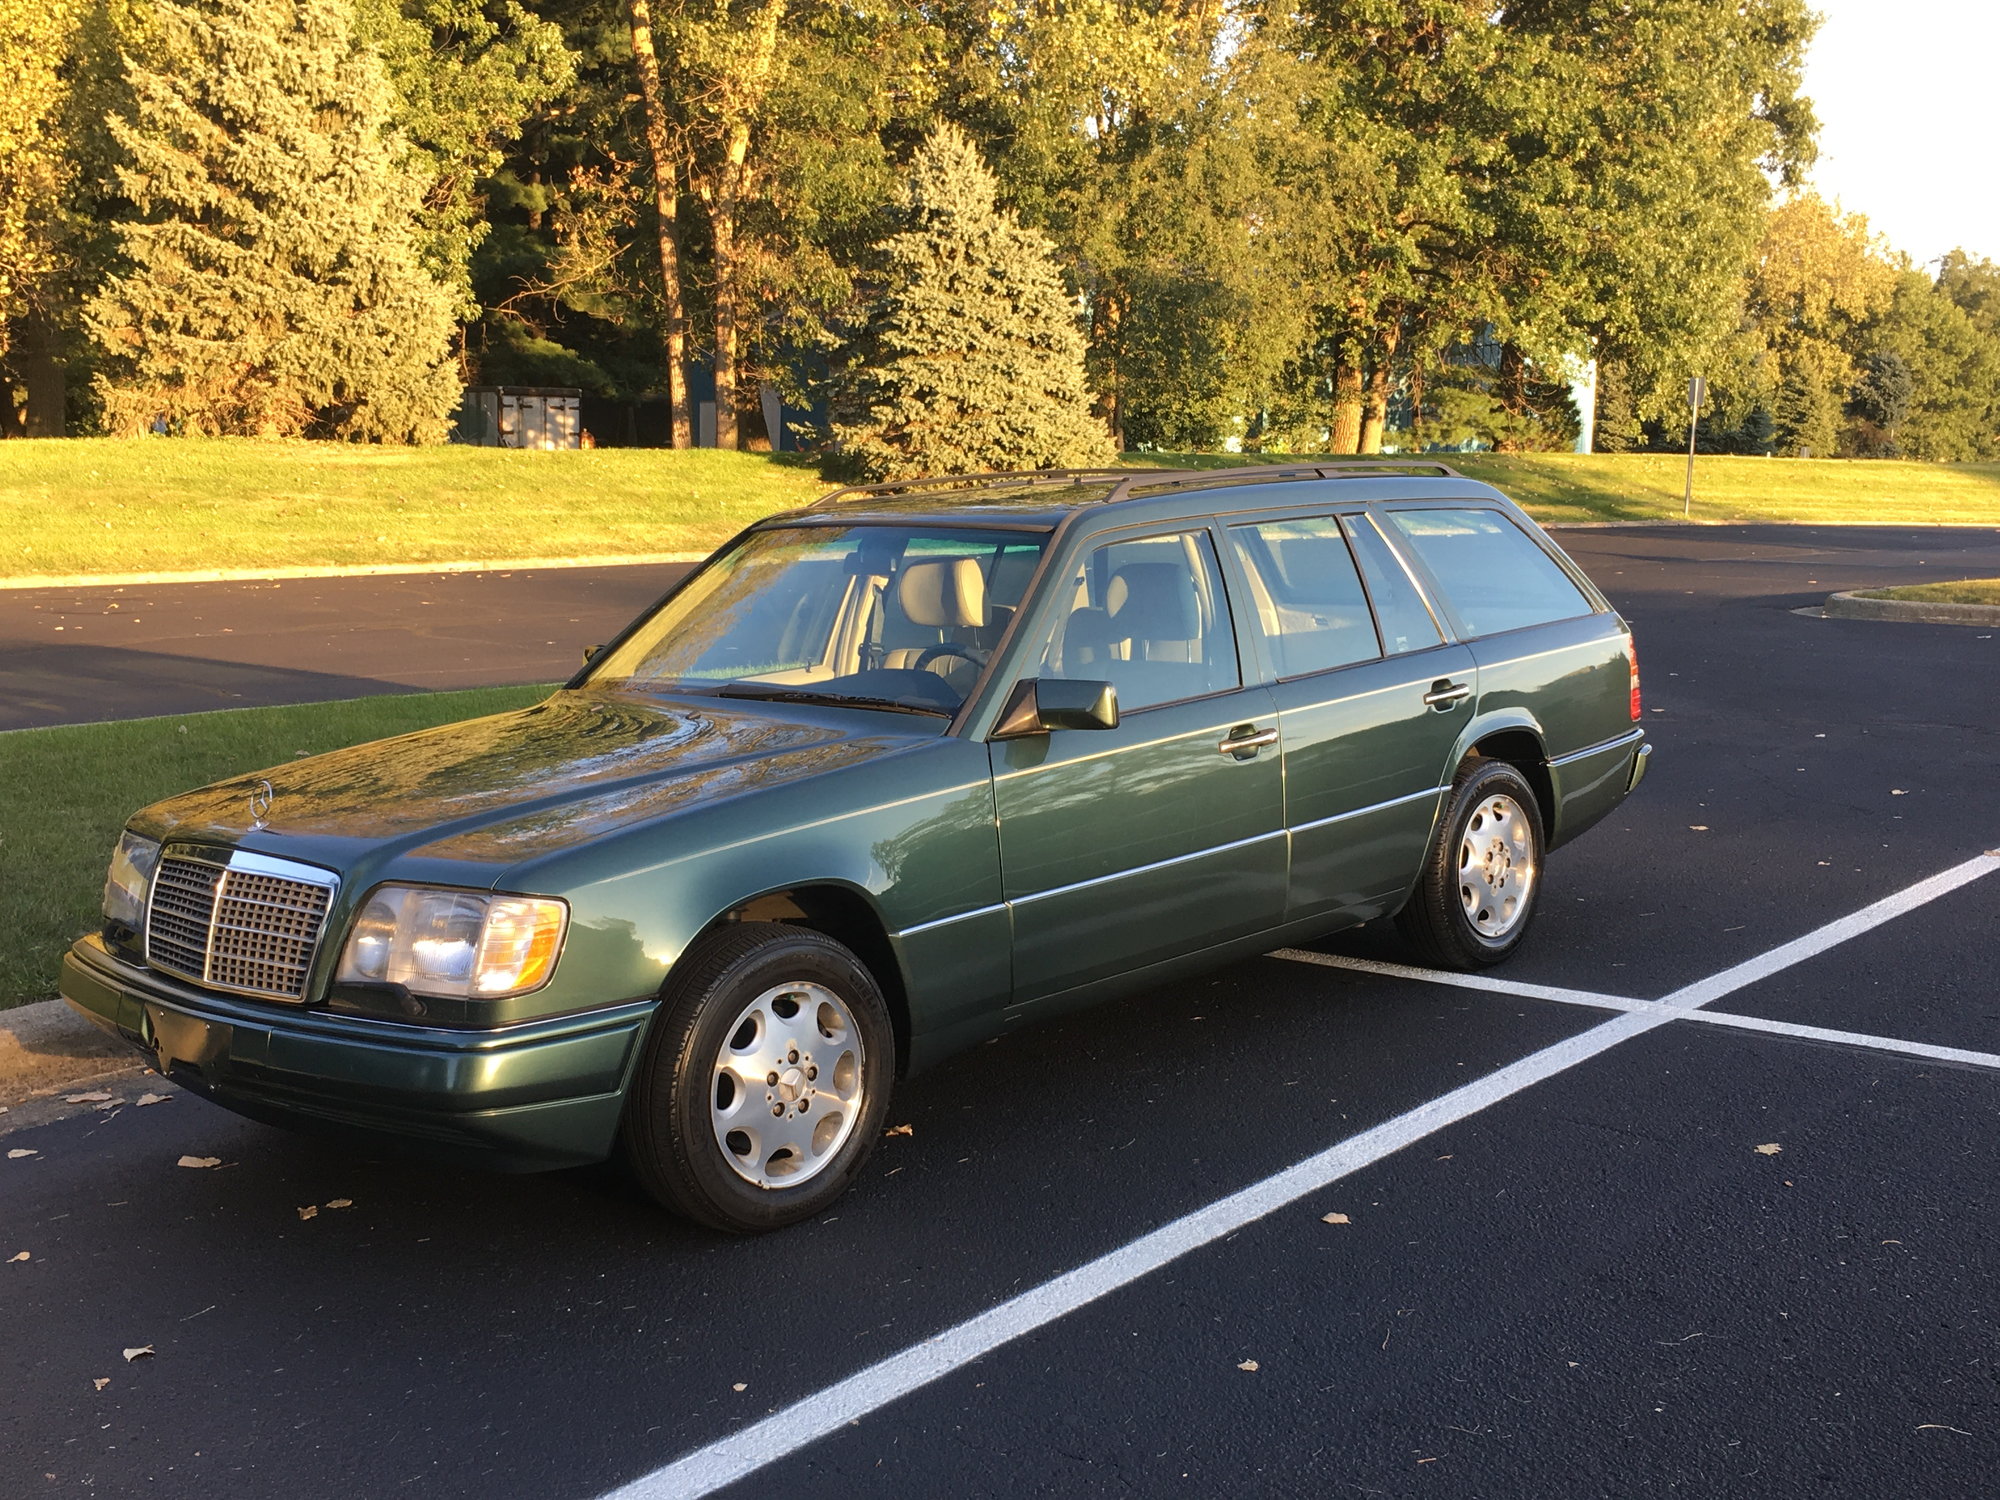 1995 Mercedes-Benz E320 - 1995 E320 W124 Wagon Great Shape Chicagoland $3,900 - Used - VIN WDBEA92E3SF332500 - 127,036 Miles - 6 cyl - 2WD - Automatic - Wagon - Other - Griffith, IN 46319, United States